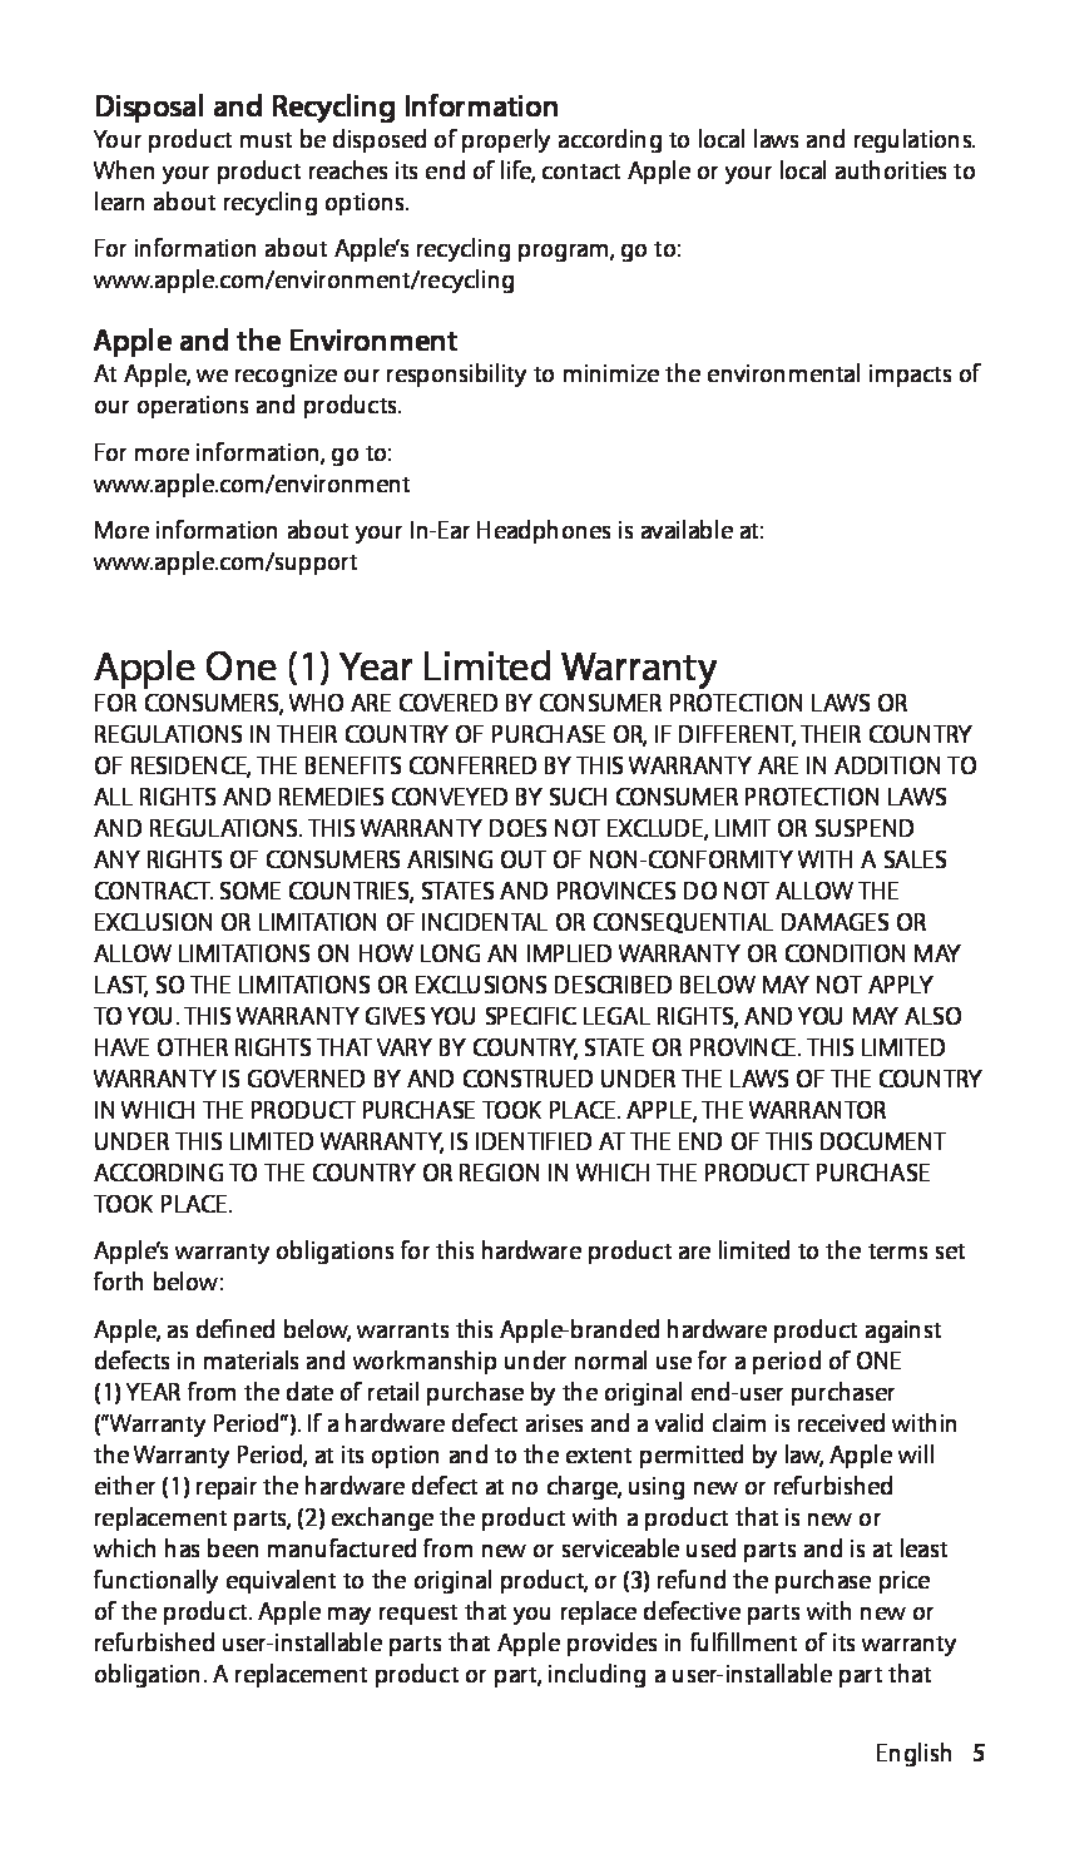 Apple ZM034-4942-A manual Apple One 1 Year Limited Warranty, Disposal and Recycling Information, Apple and the Environment 